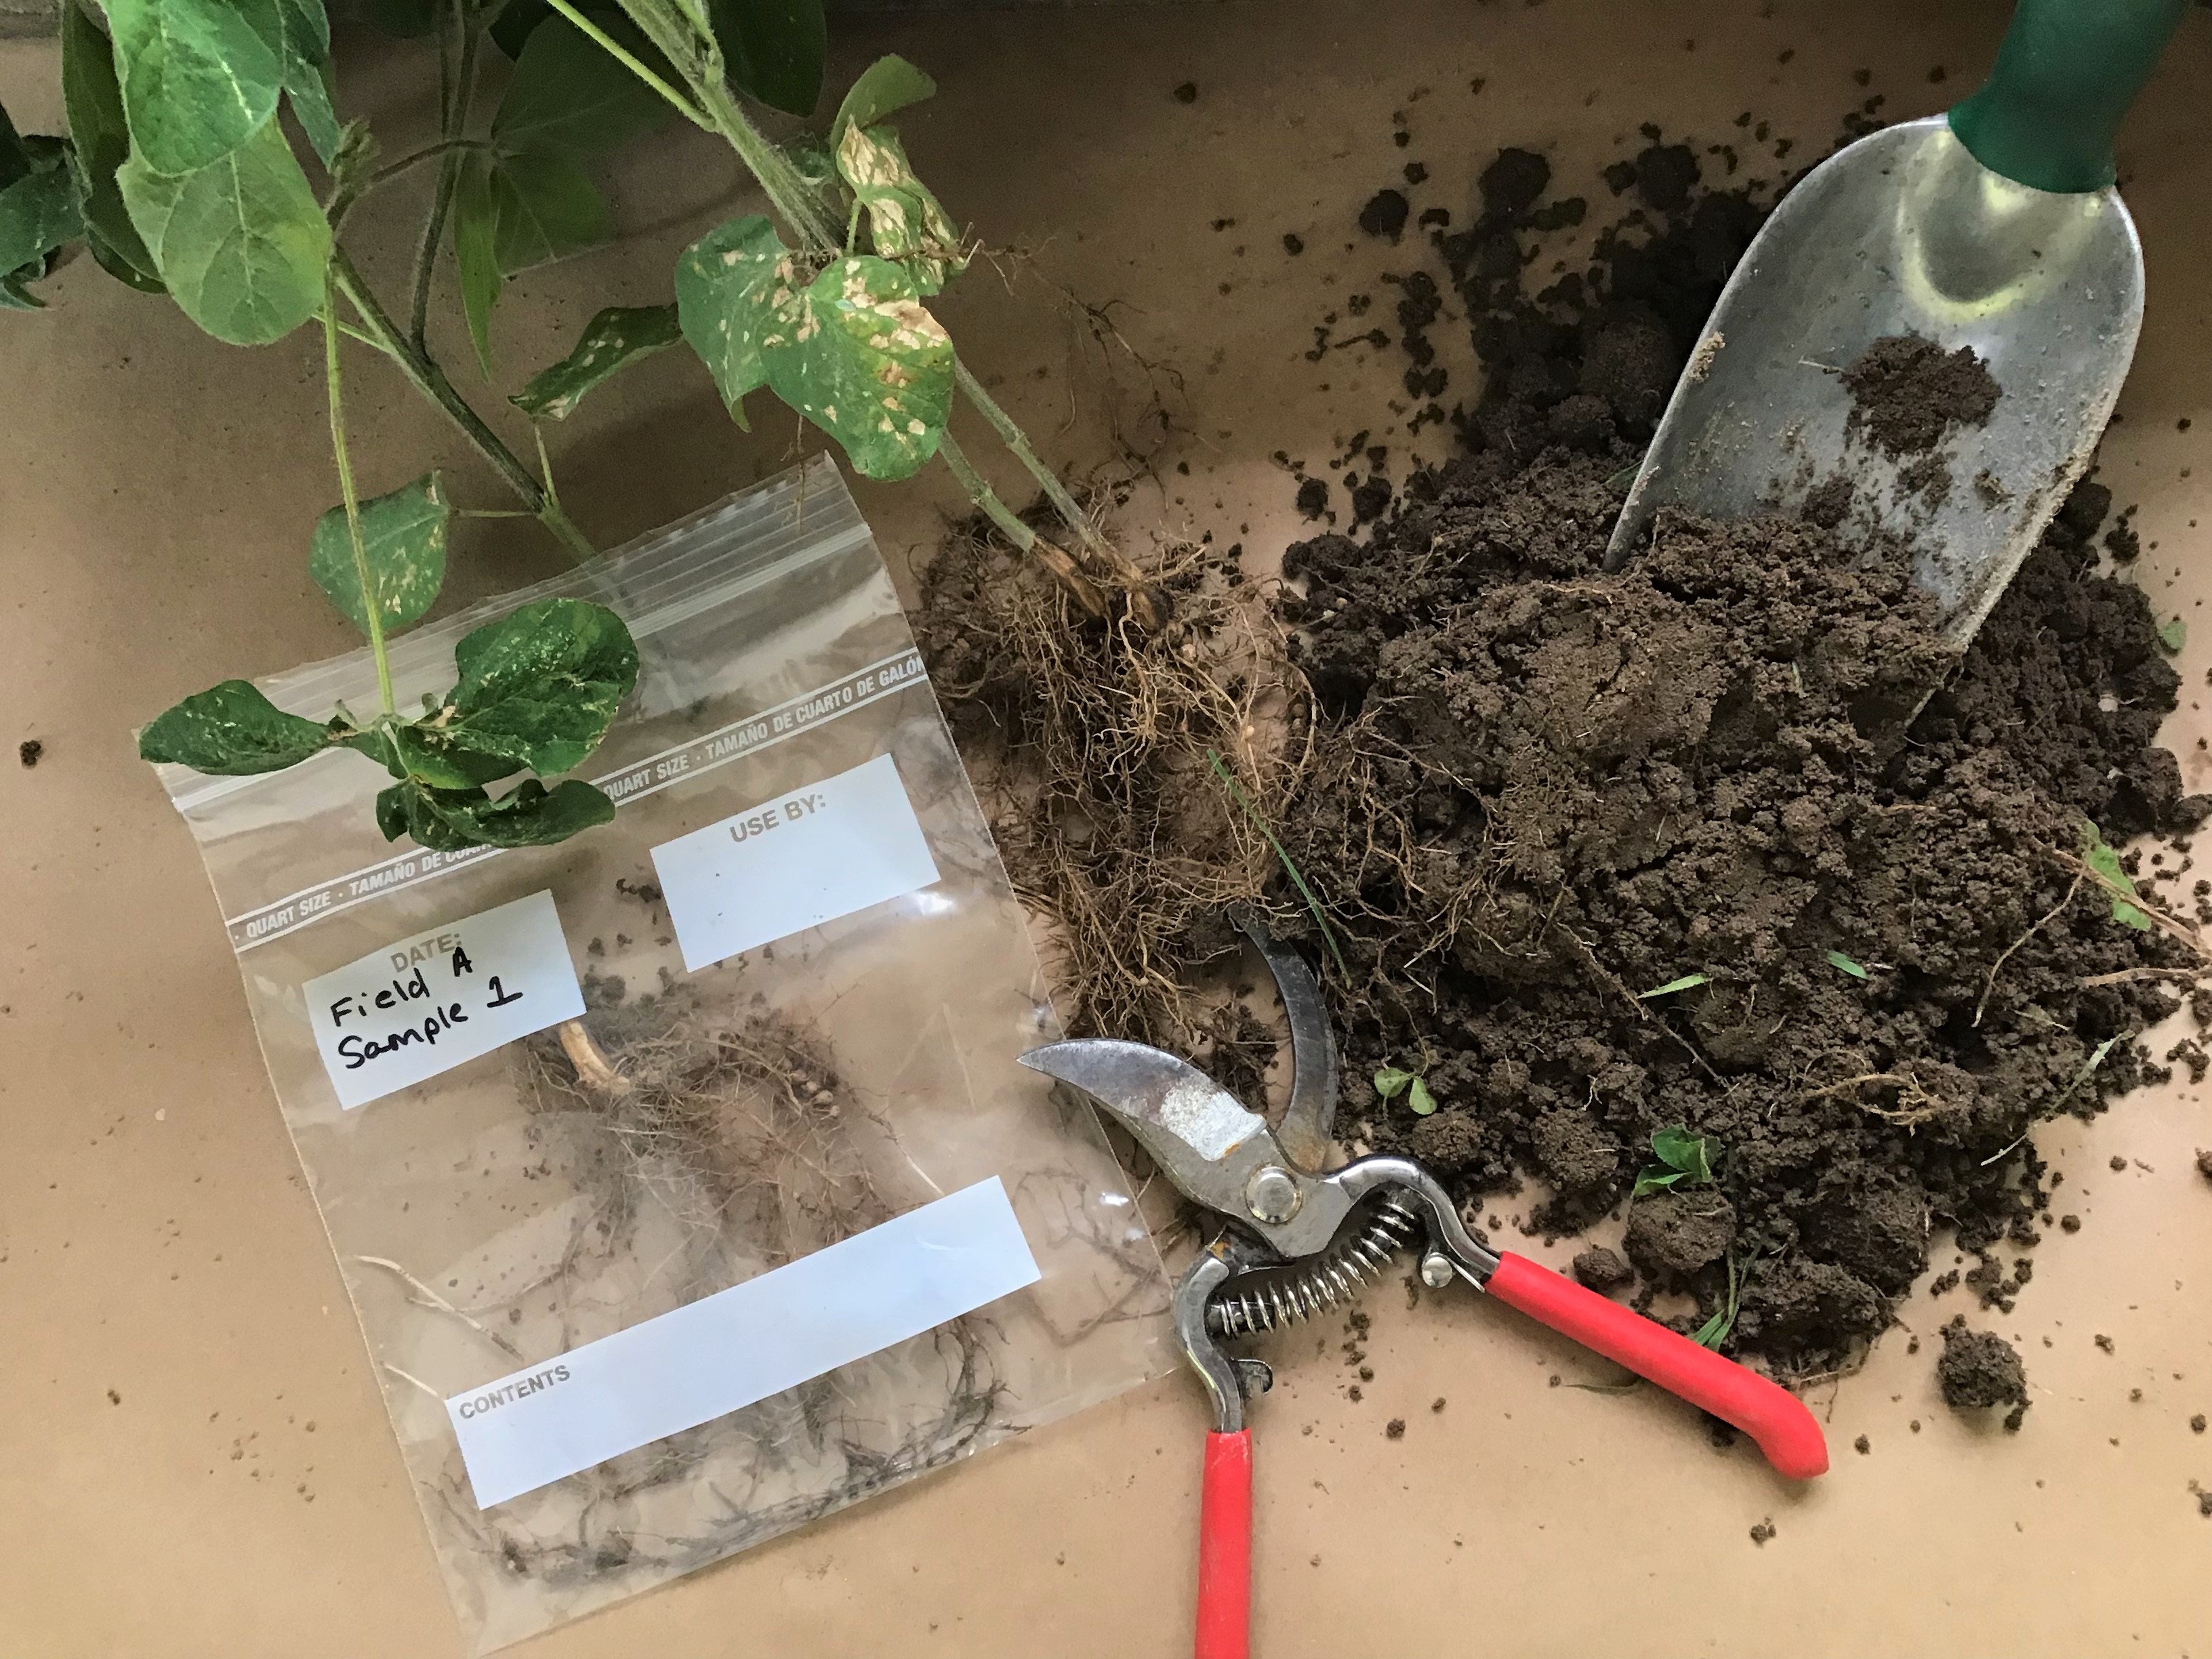 A soil sample for nematode analysis should include plant feeder roots.